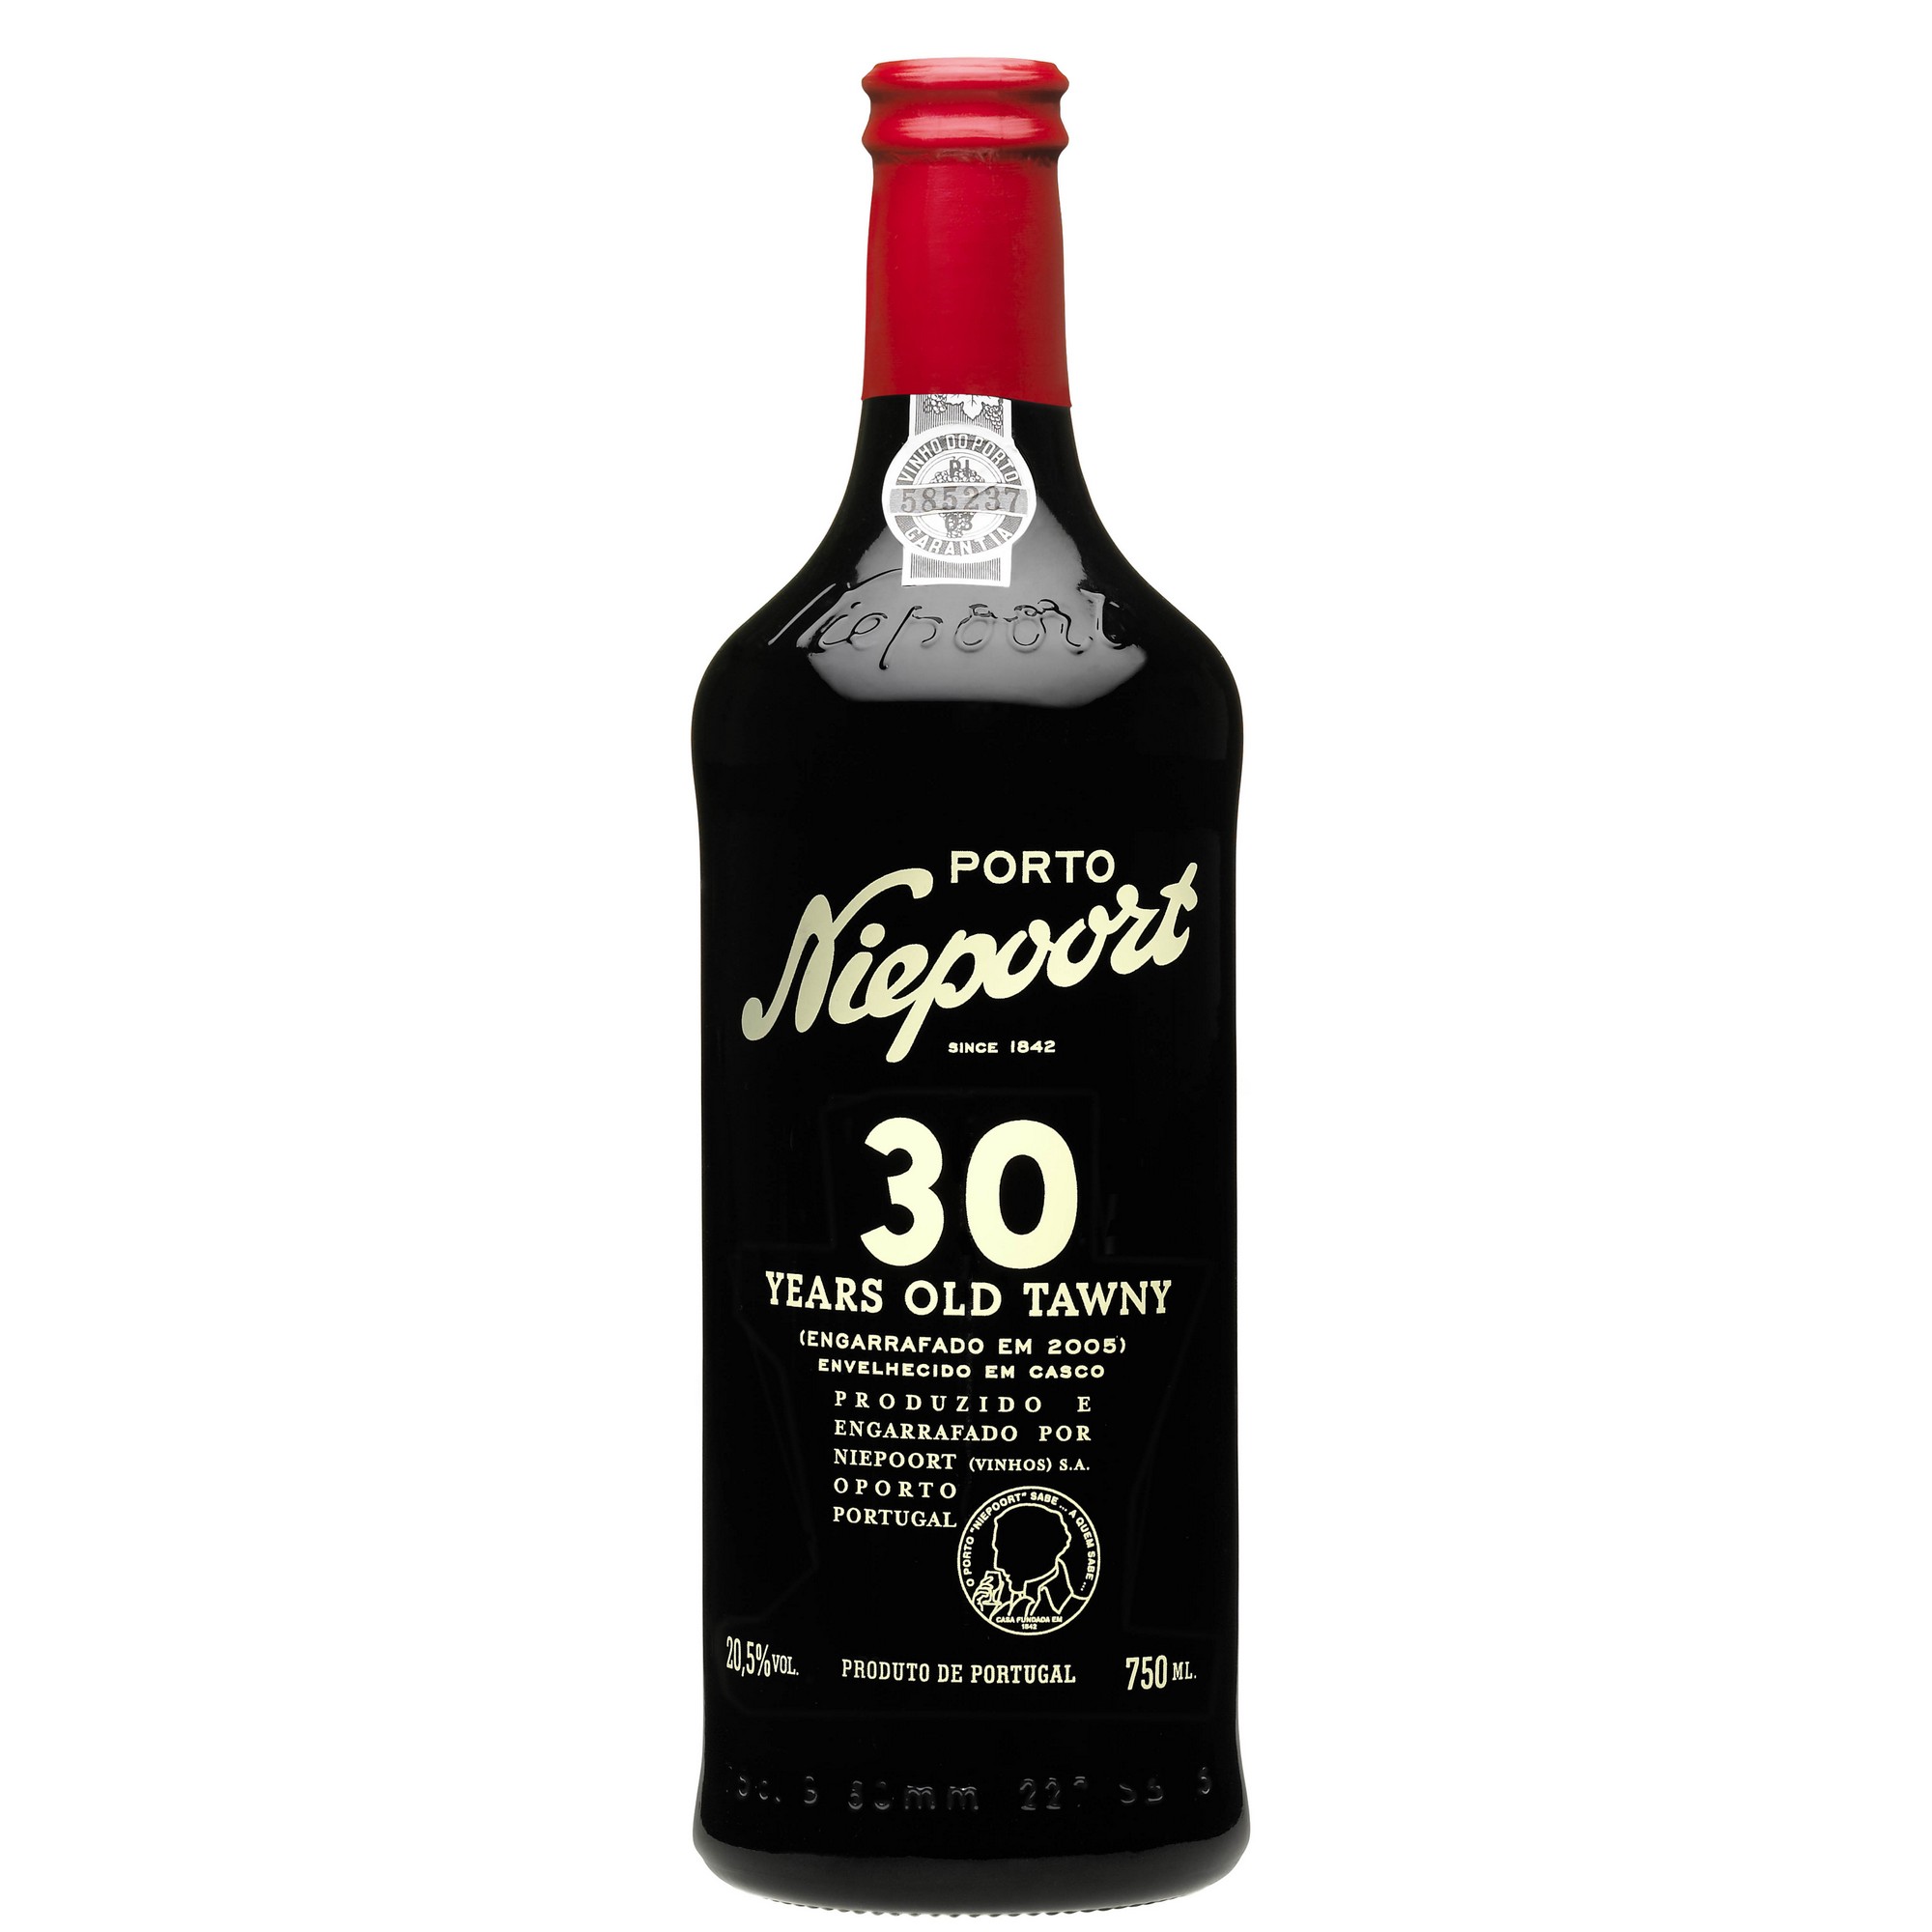 Niepoort tawny 30 years old   20,5%   75cl